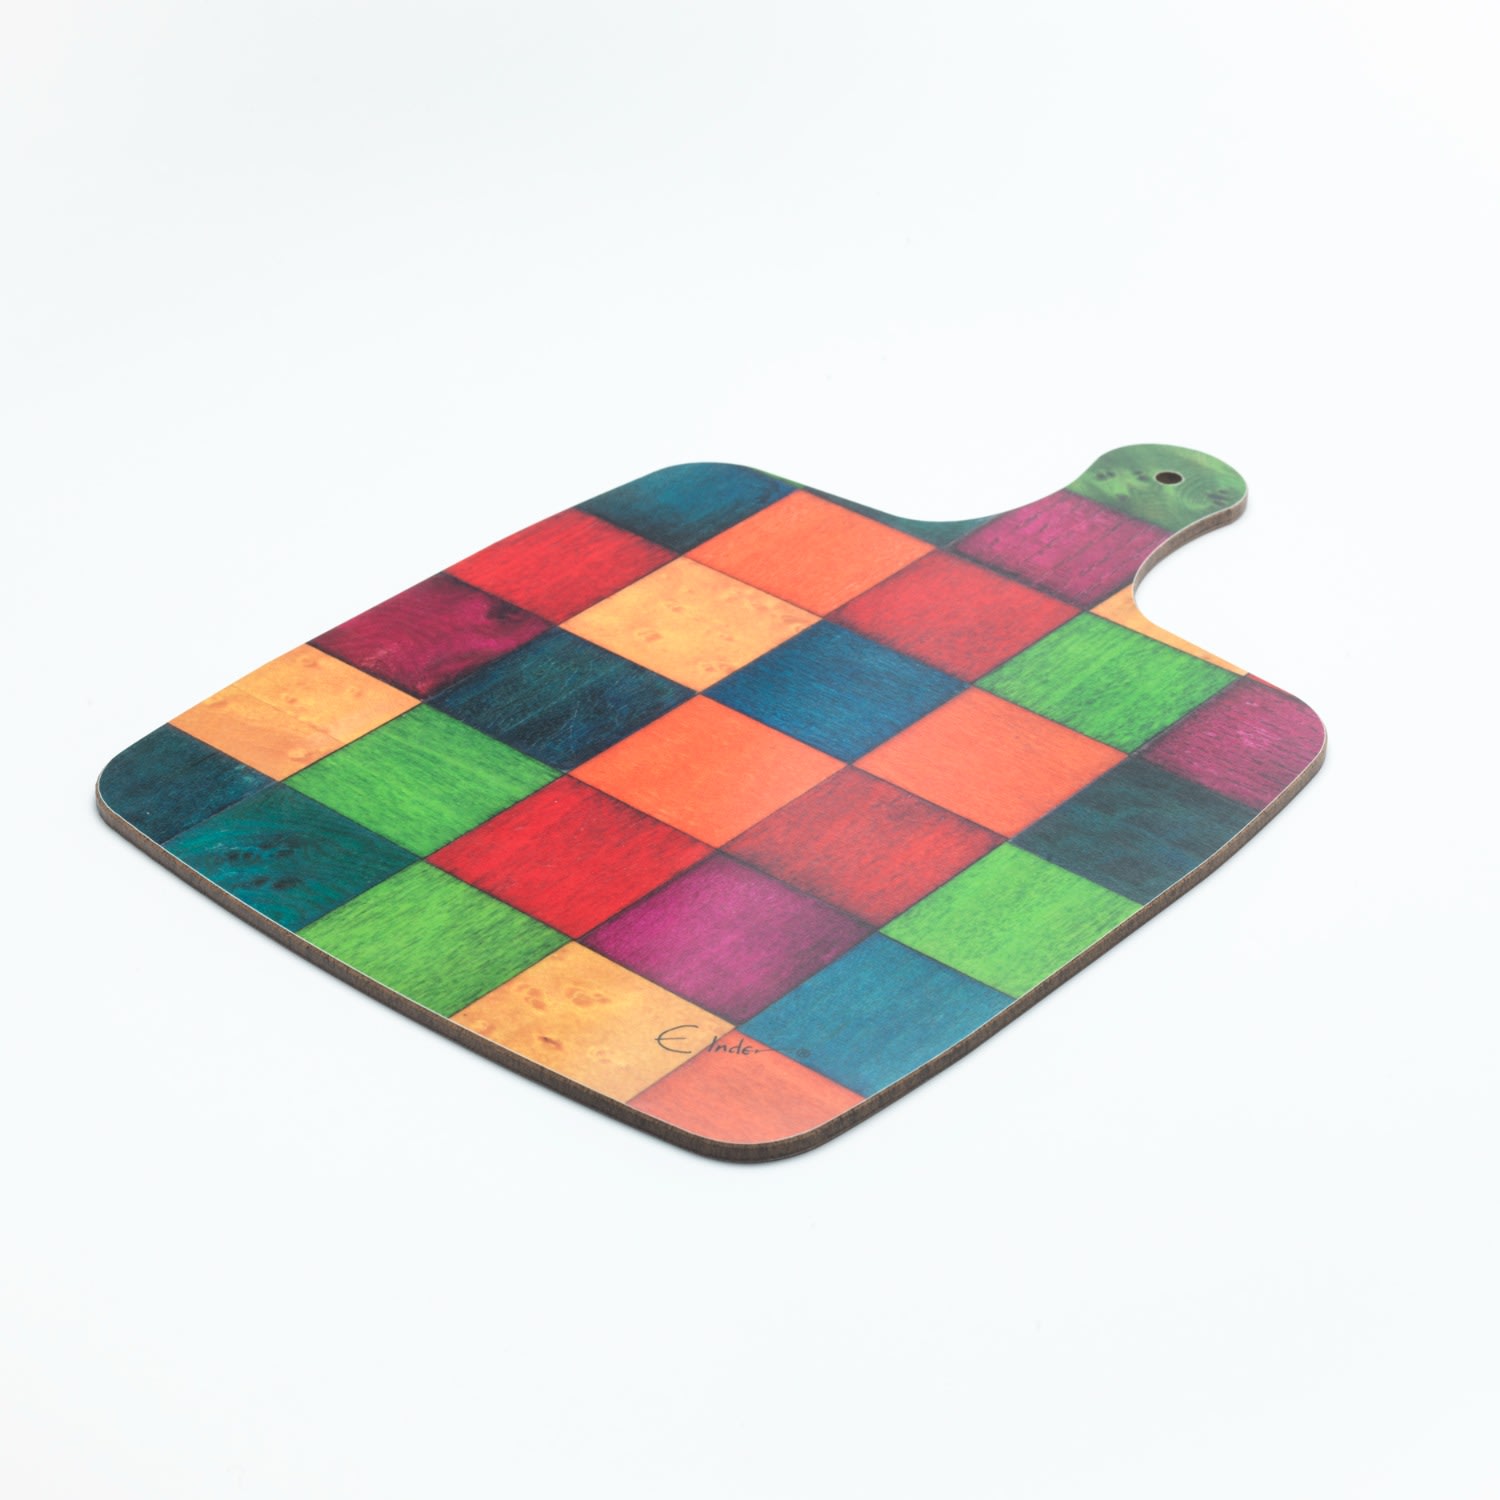 Two Chopping Board Paddles In Colours Of The Rainbow. One Standard And One Small. They Will Brighten Any Kitchen. Gift For The Cook. E. Inder Designs